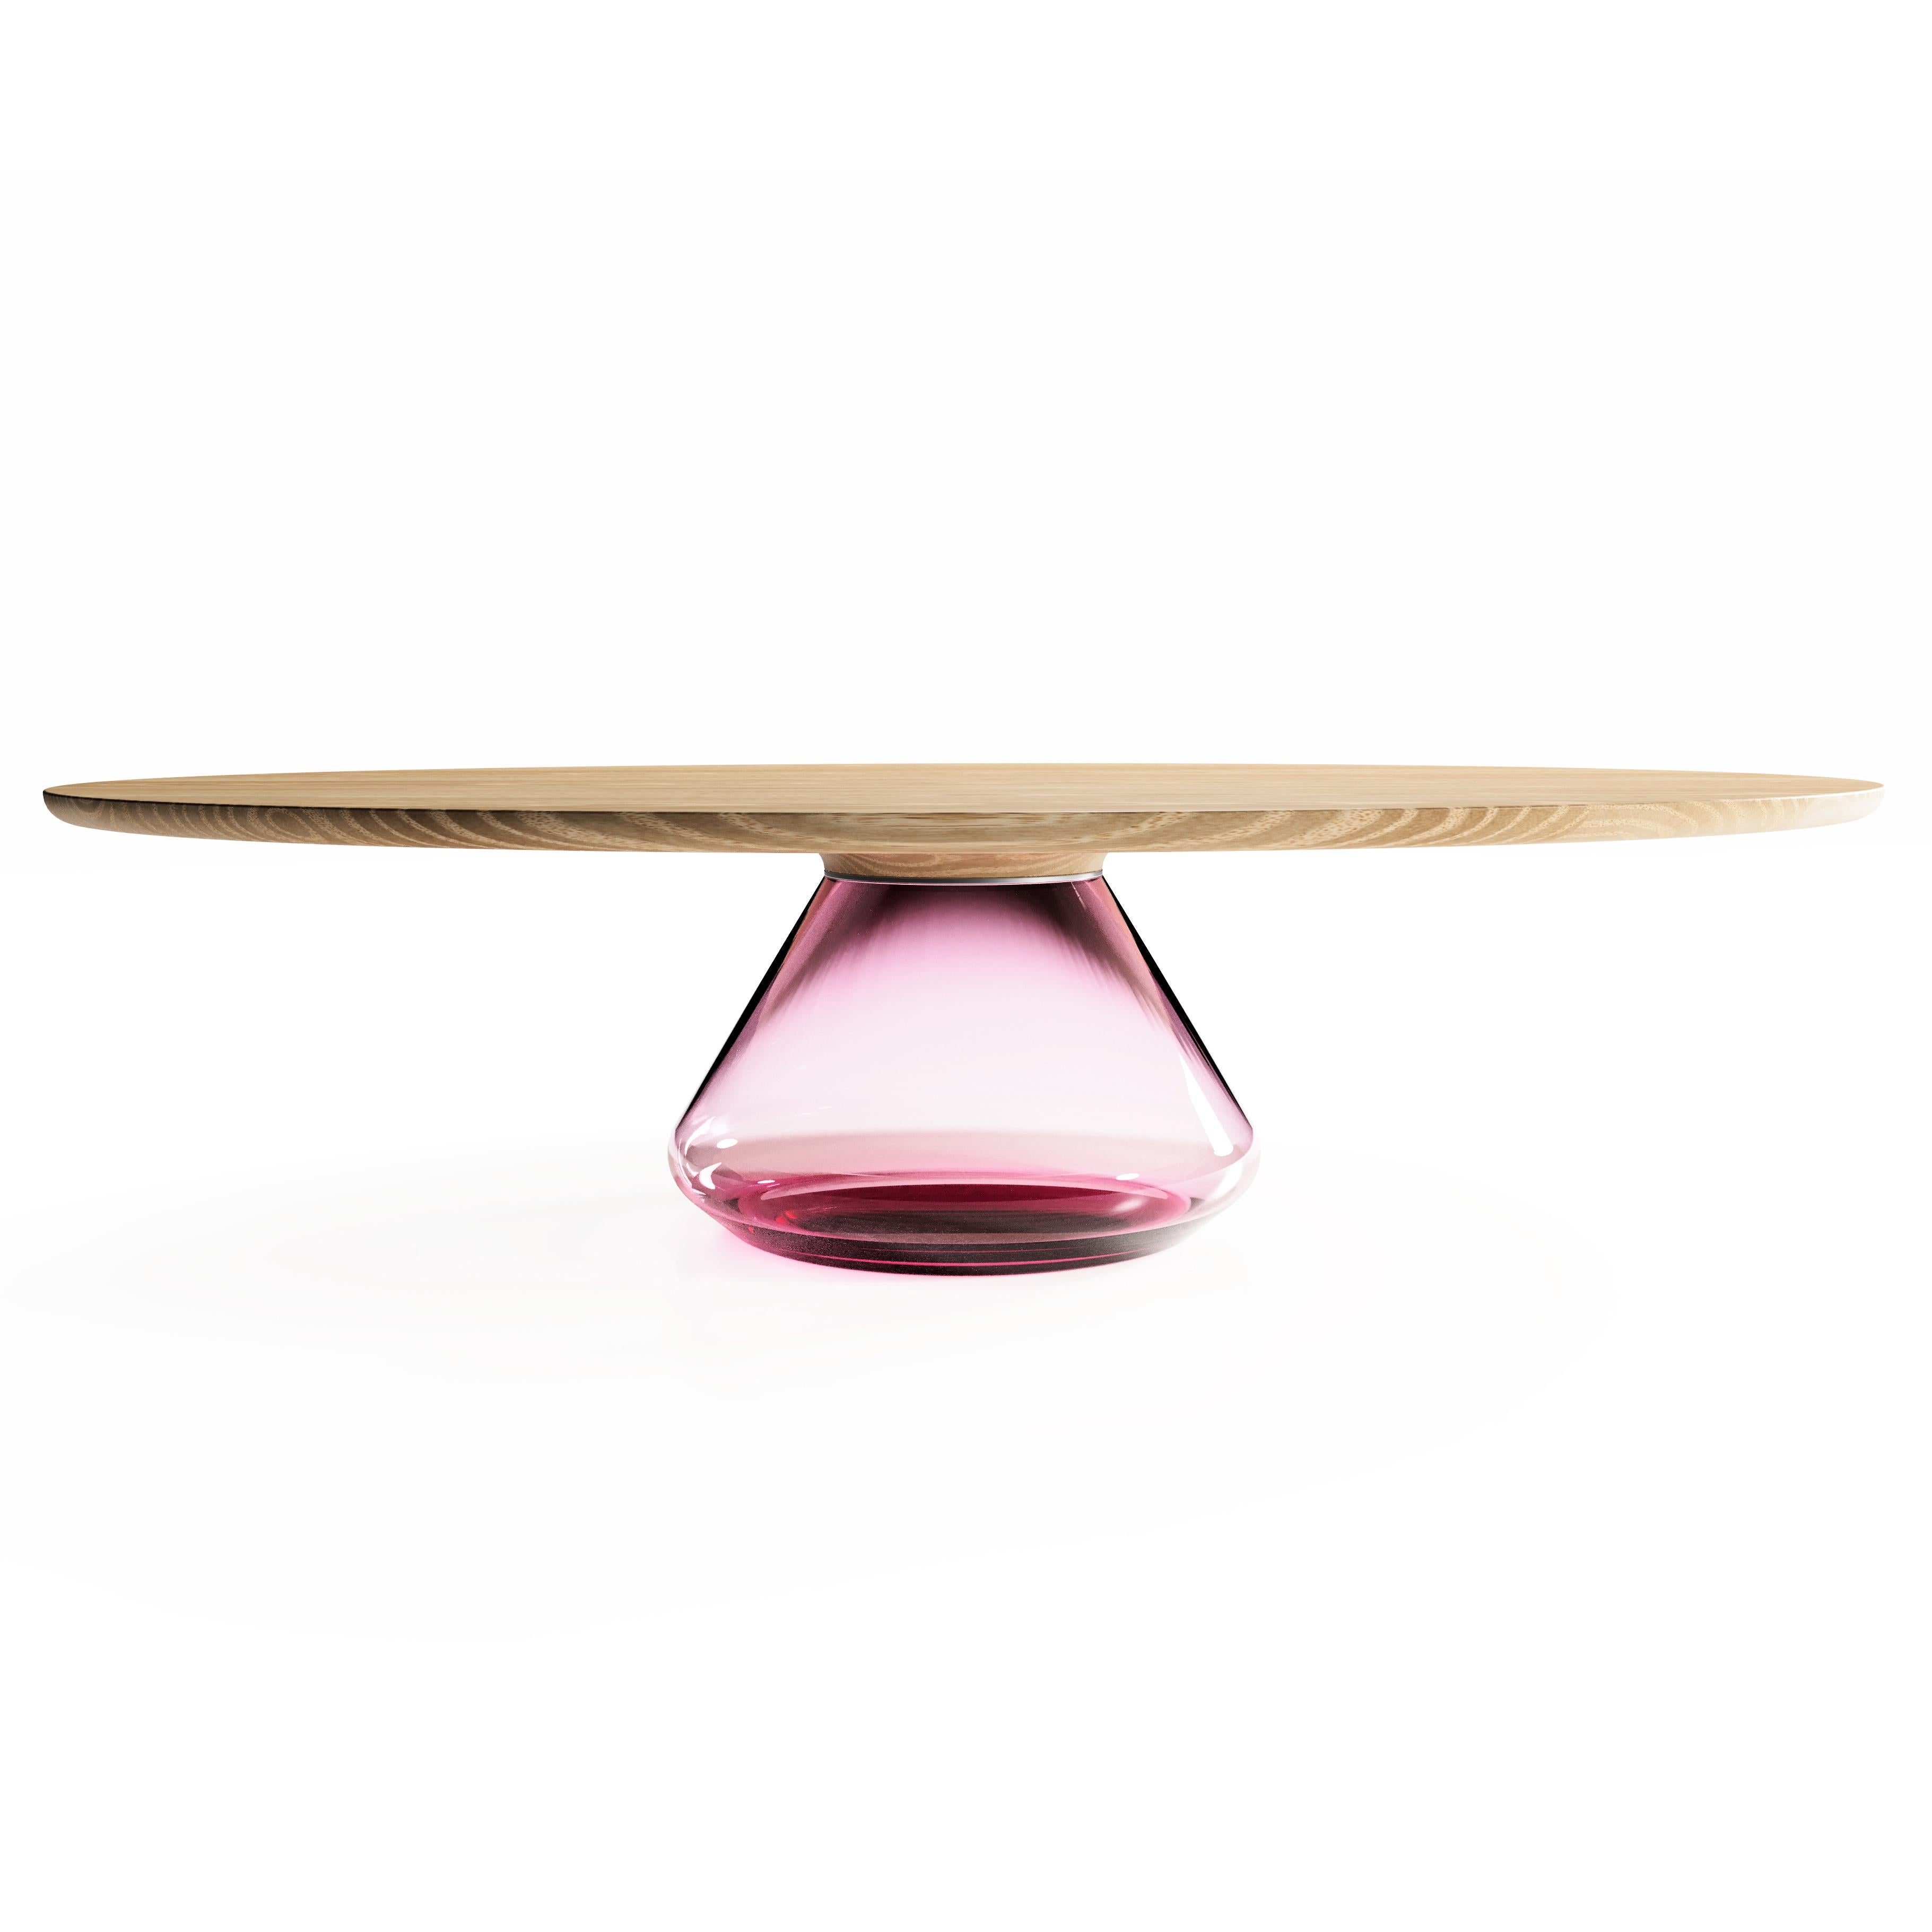 The pink lady Eclipse I, limited edition coffee table by Grzegorz Majka
Limited edition of 8
Dimensions: 54 x 48 x 14 in
Materials: Glass, oak

The total eclipse of every interior? With this amazing table everything is possible as with its